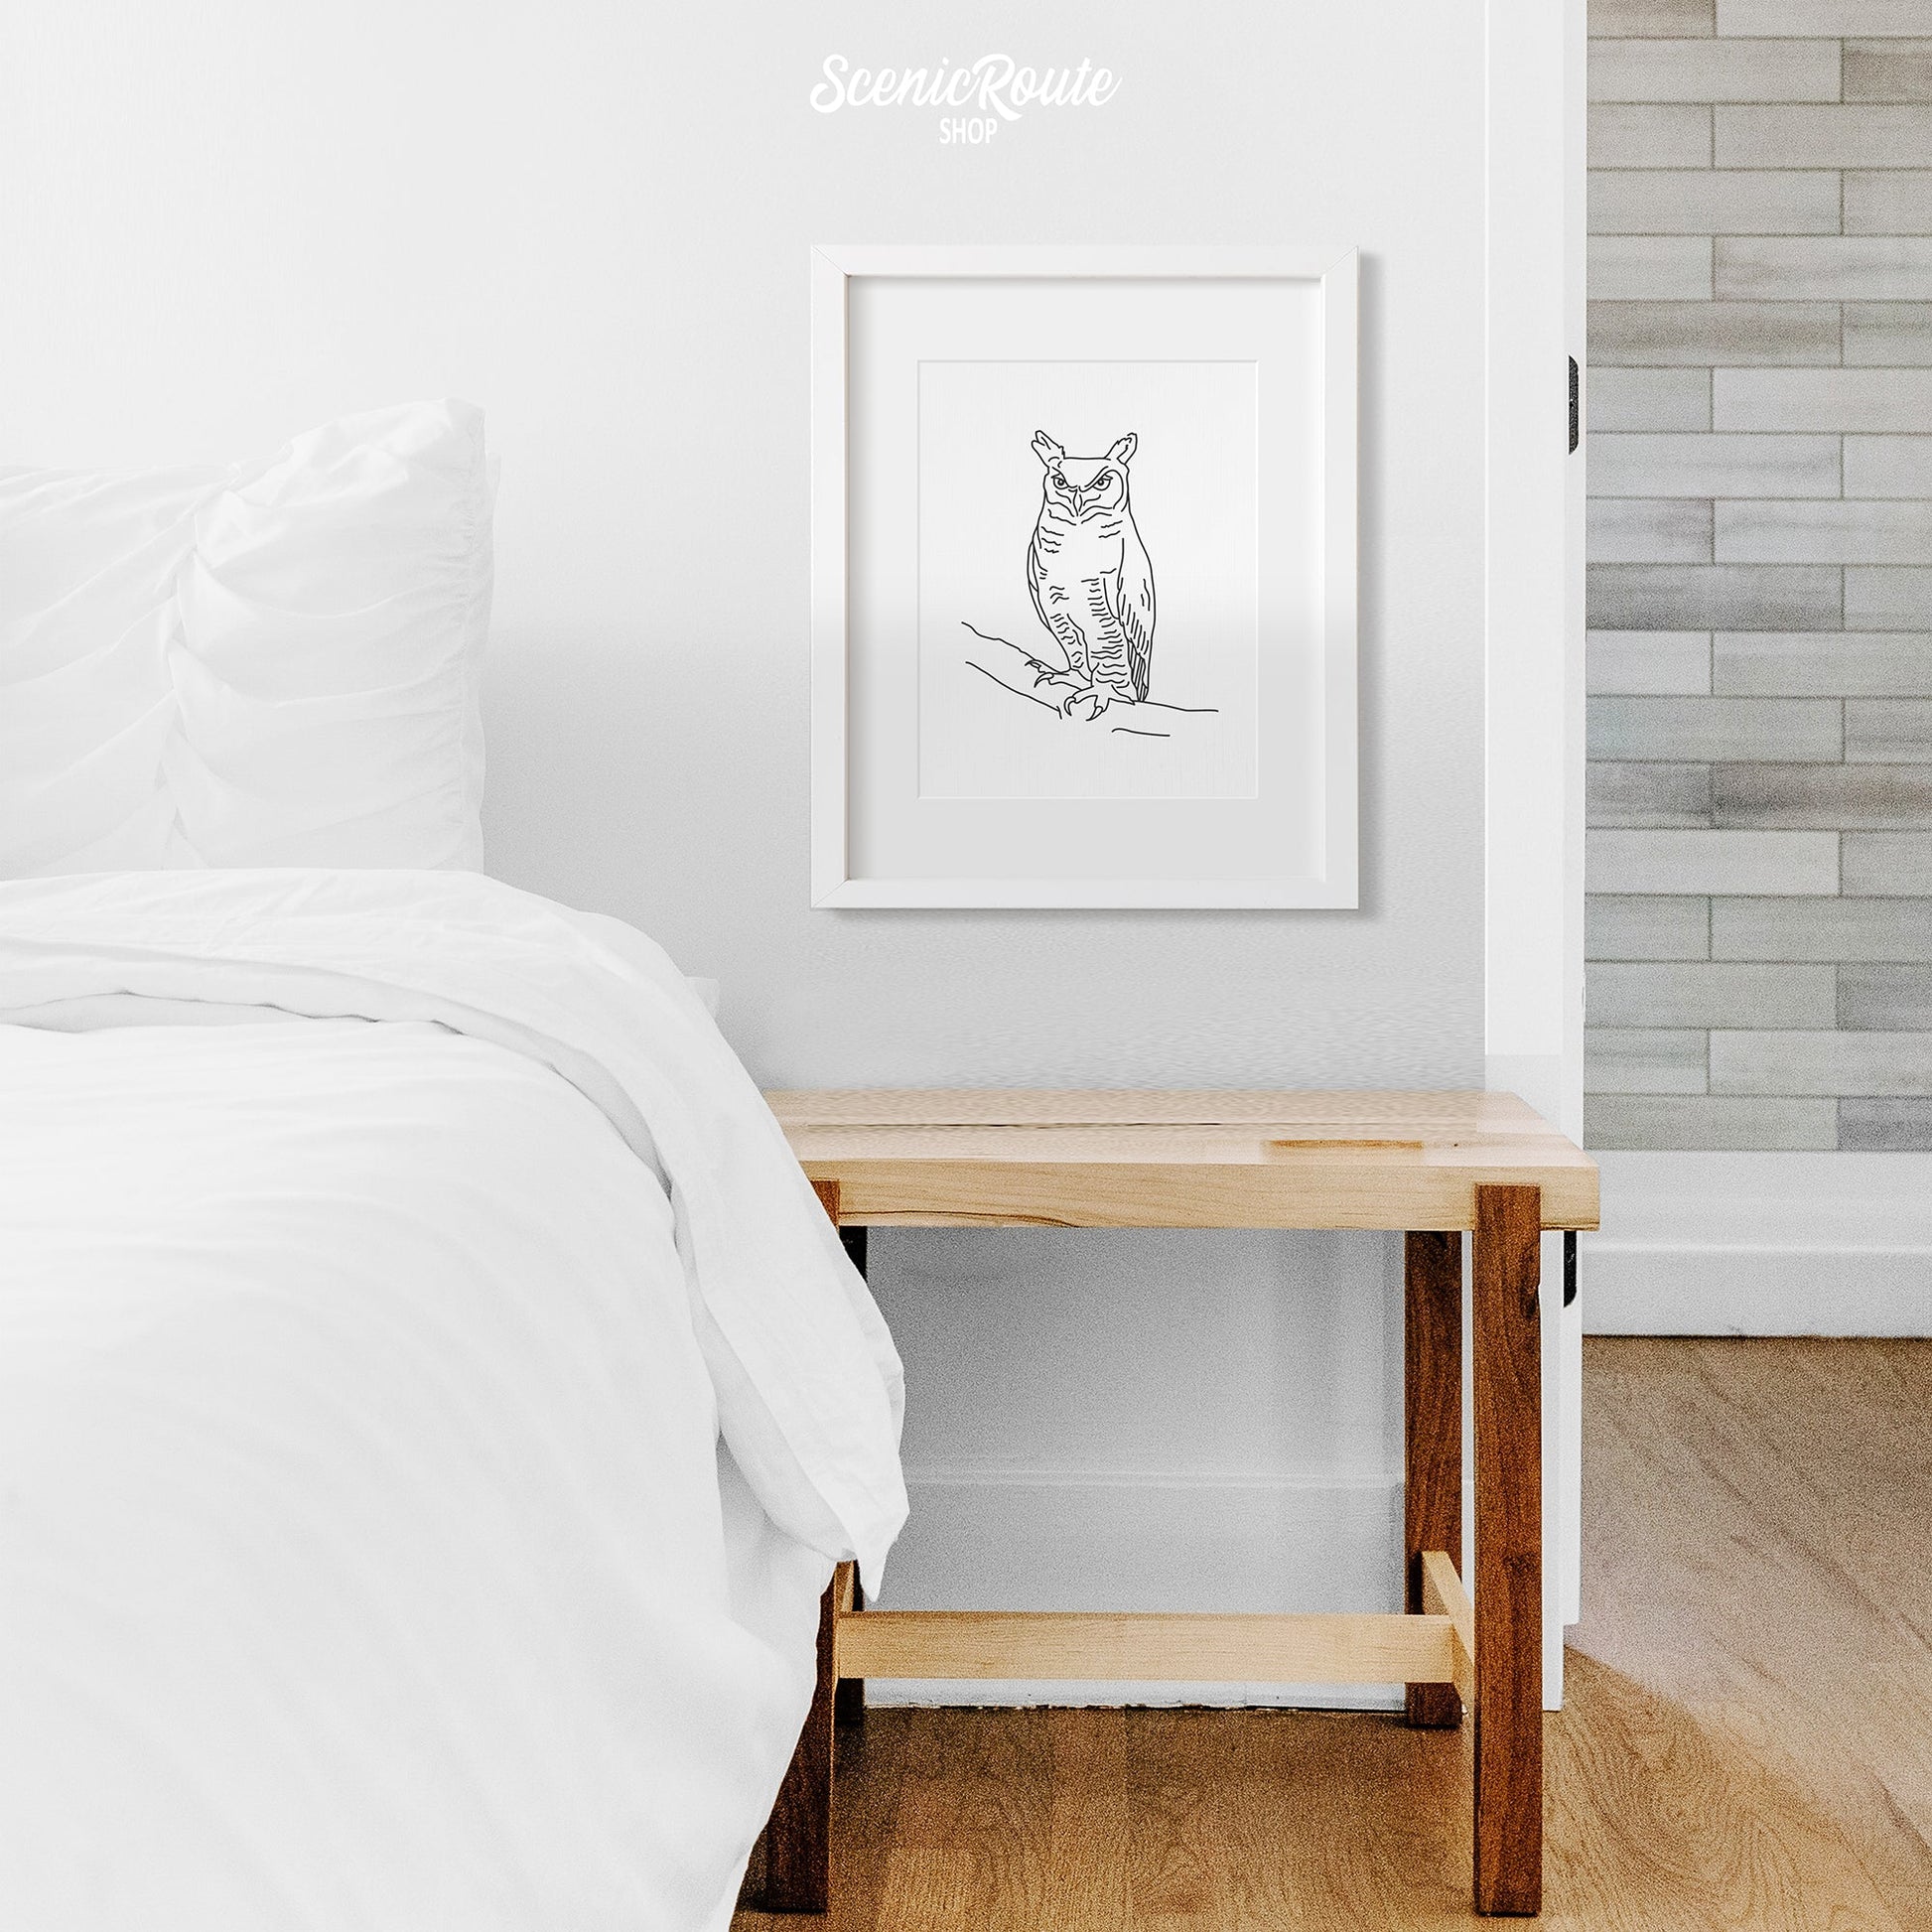 A framed line art drawing of an Owl above a nightstand next to a bed